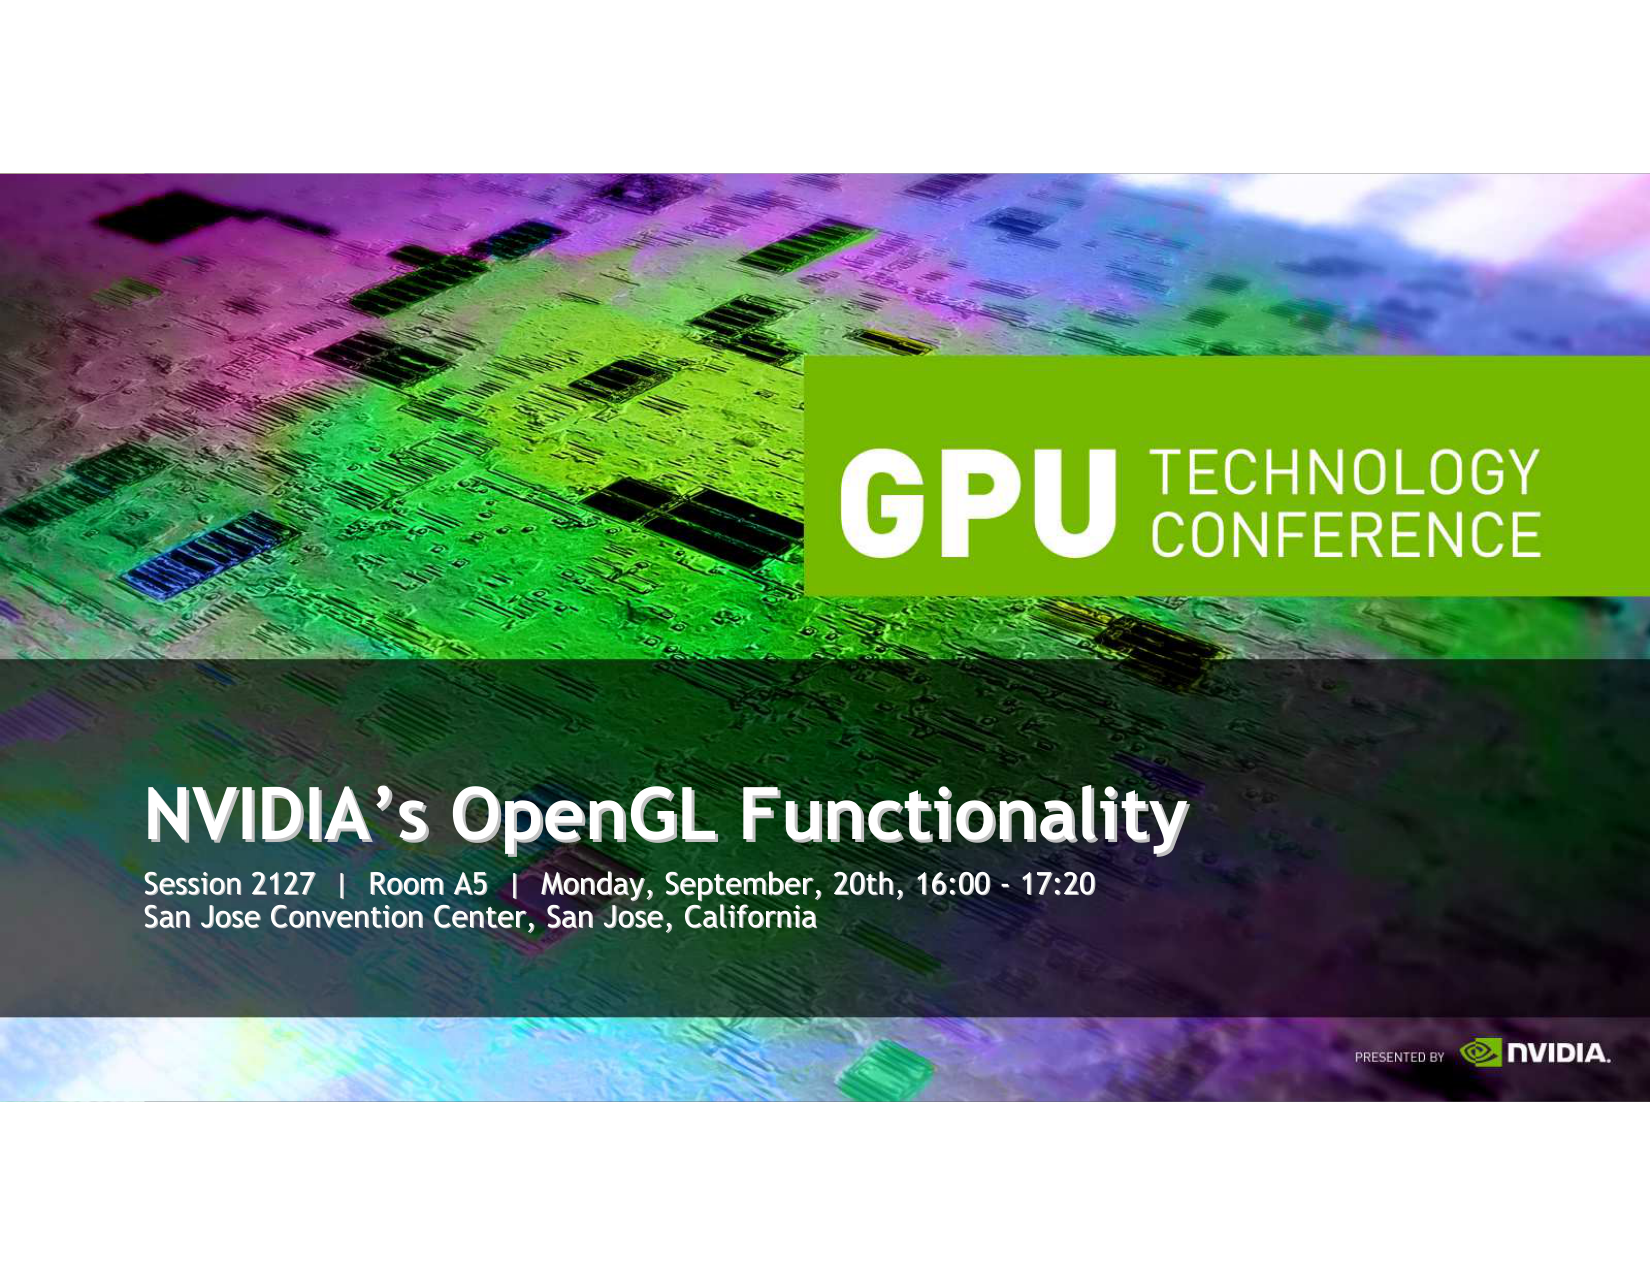 opengl 3.3 and directx 10-capable video adapter for gpu-related functionality